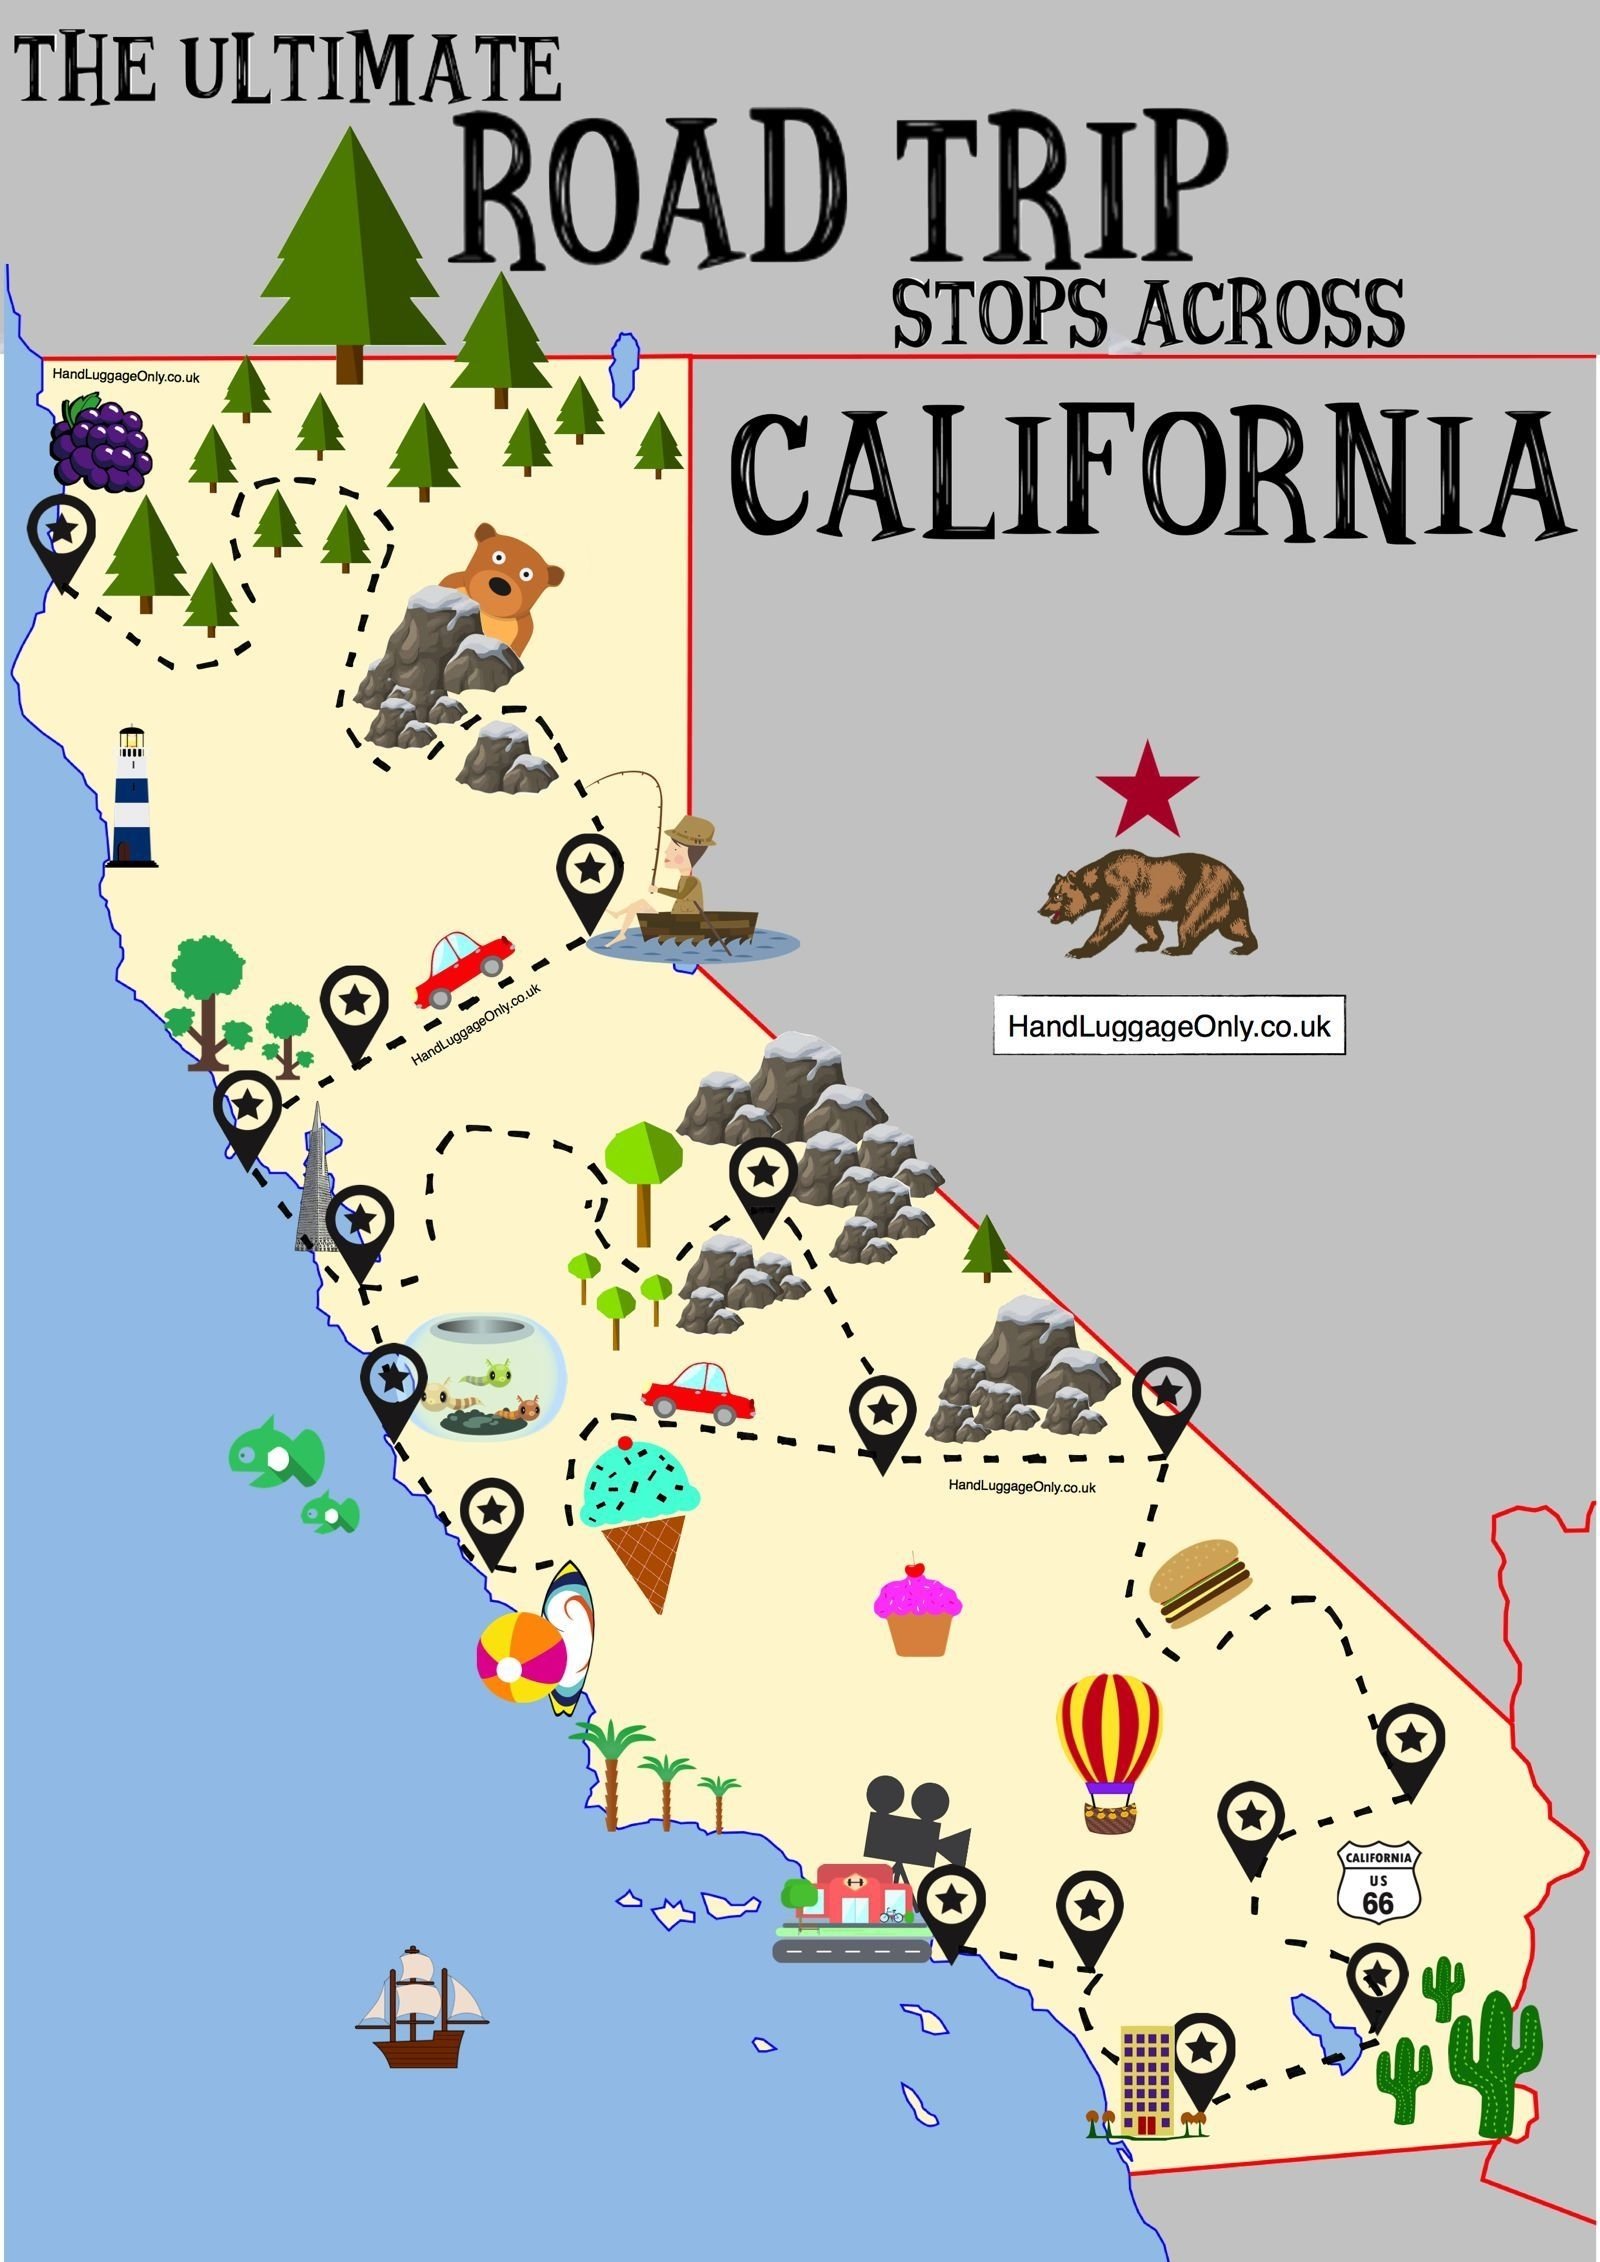 10 Unique Cross Country Road Trip Ideas the ultimate road trip map of places to see in california road 1 2022